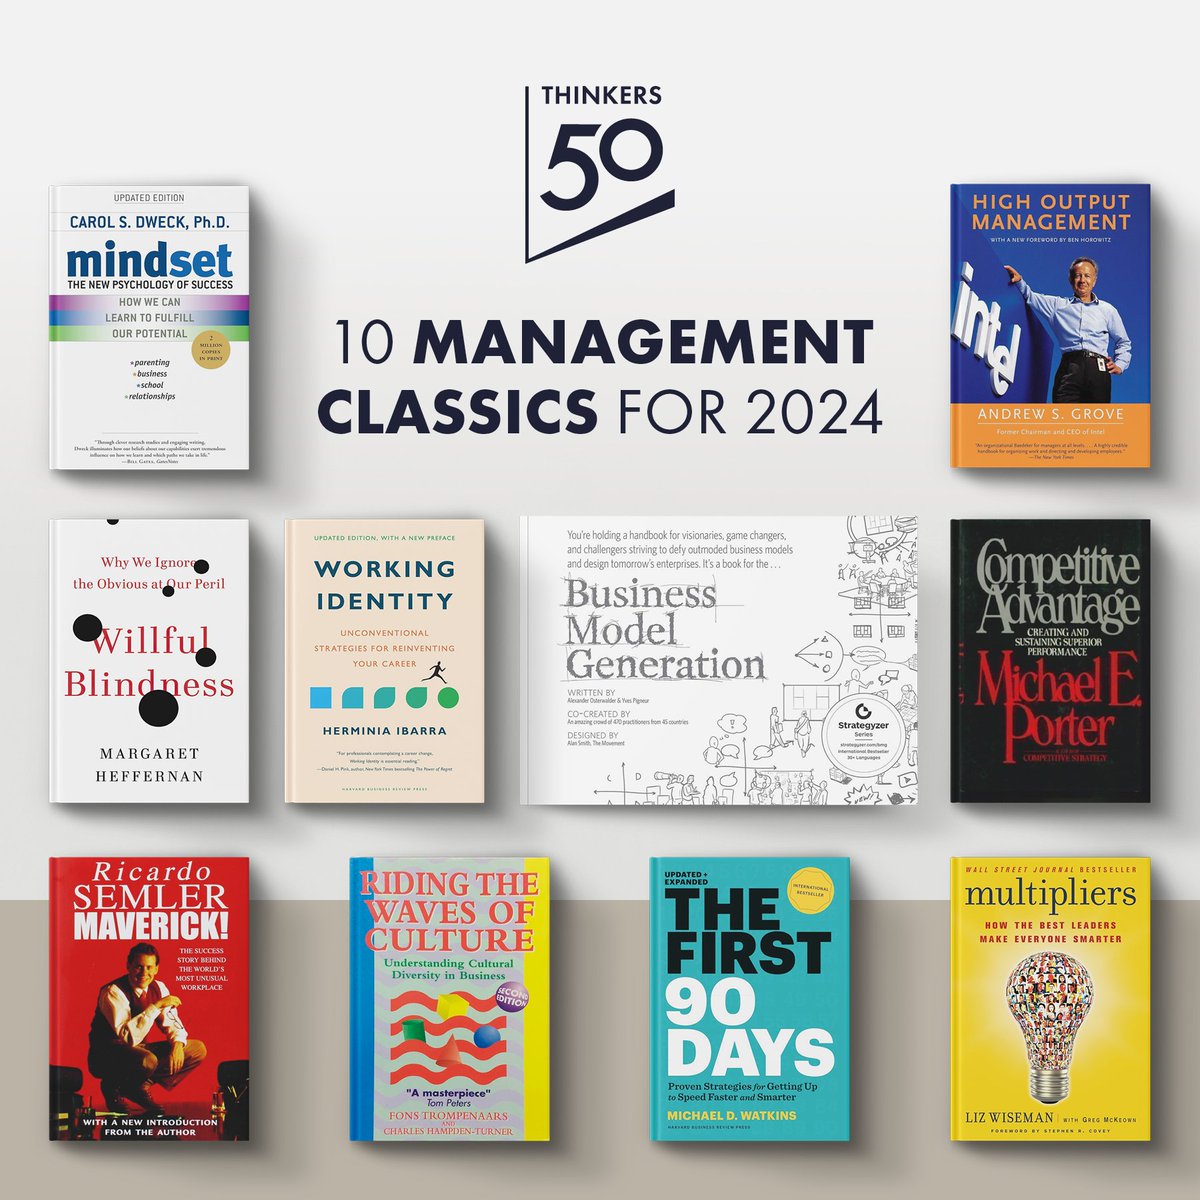 Excited to bring you the #Thinkers50 Management Classics Booklist for 2024, our annual list honoring management and business books that have stood the test of time and remain powerfully relevant today: thinkers50.com/booklists/#man…